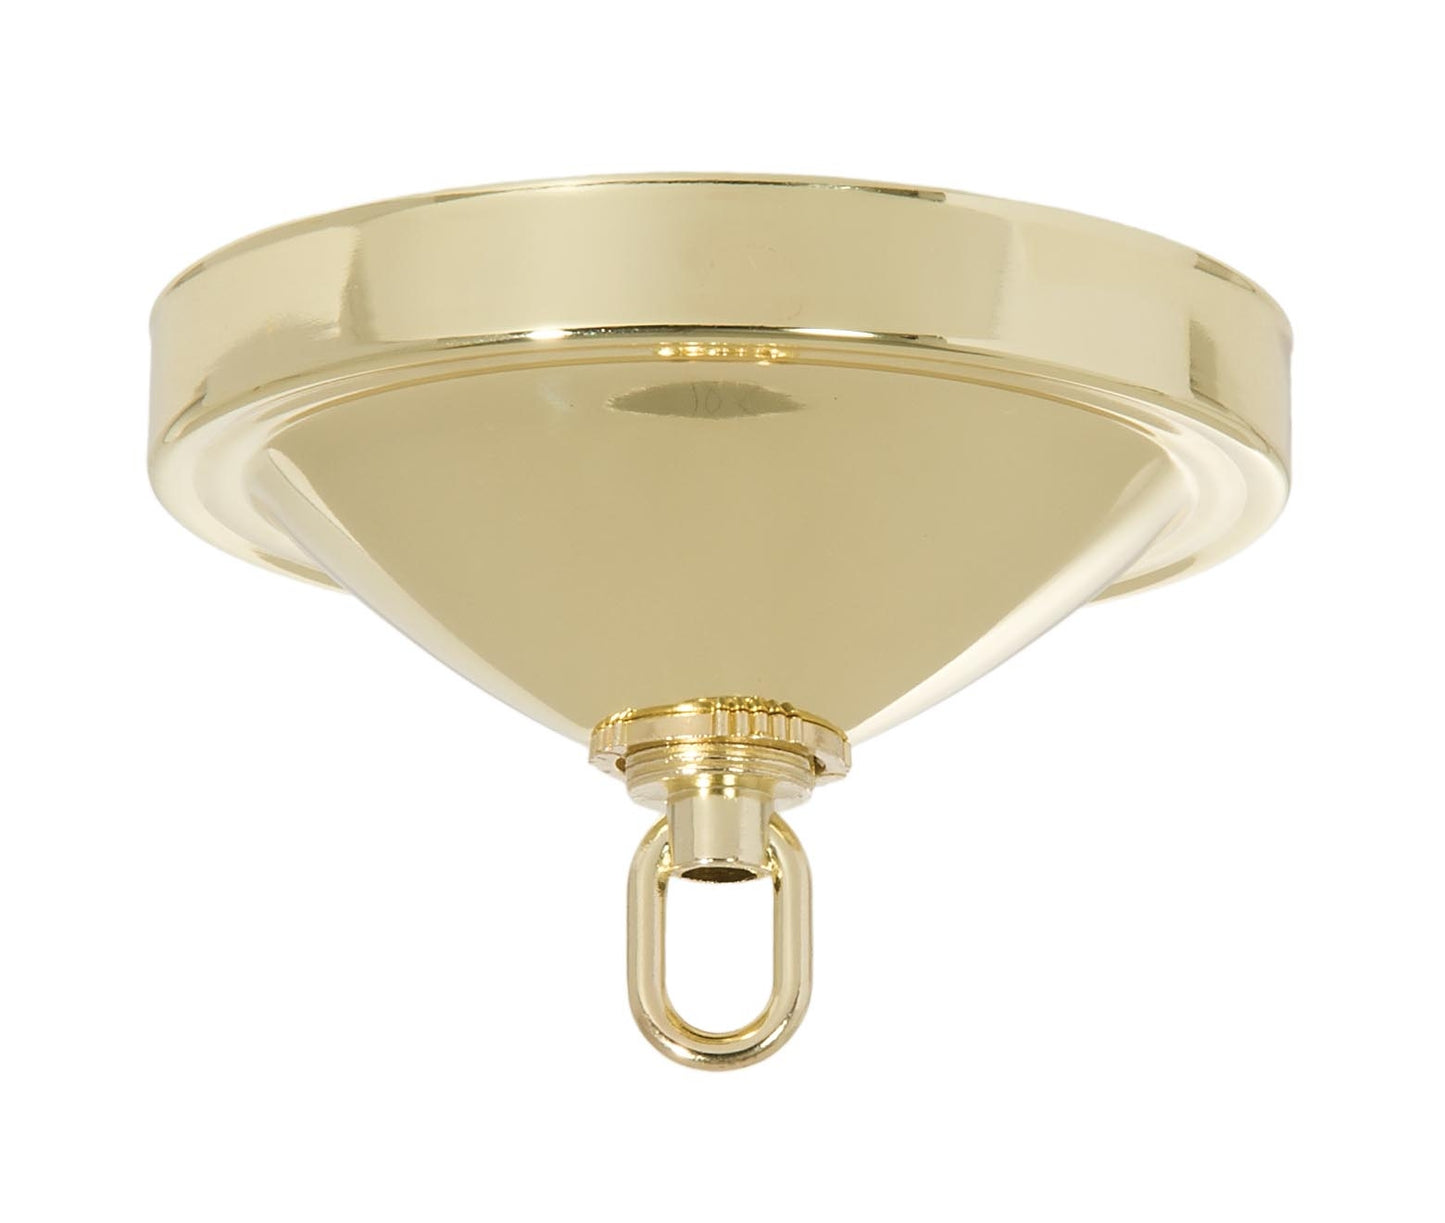 5 Inch Diameter Brass Plated Steel Canopy with Hardware Kit and Screw Collar Loop